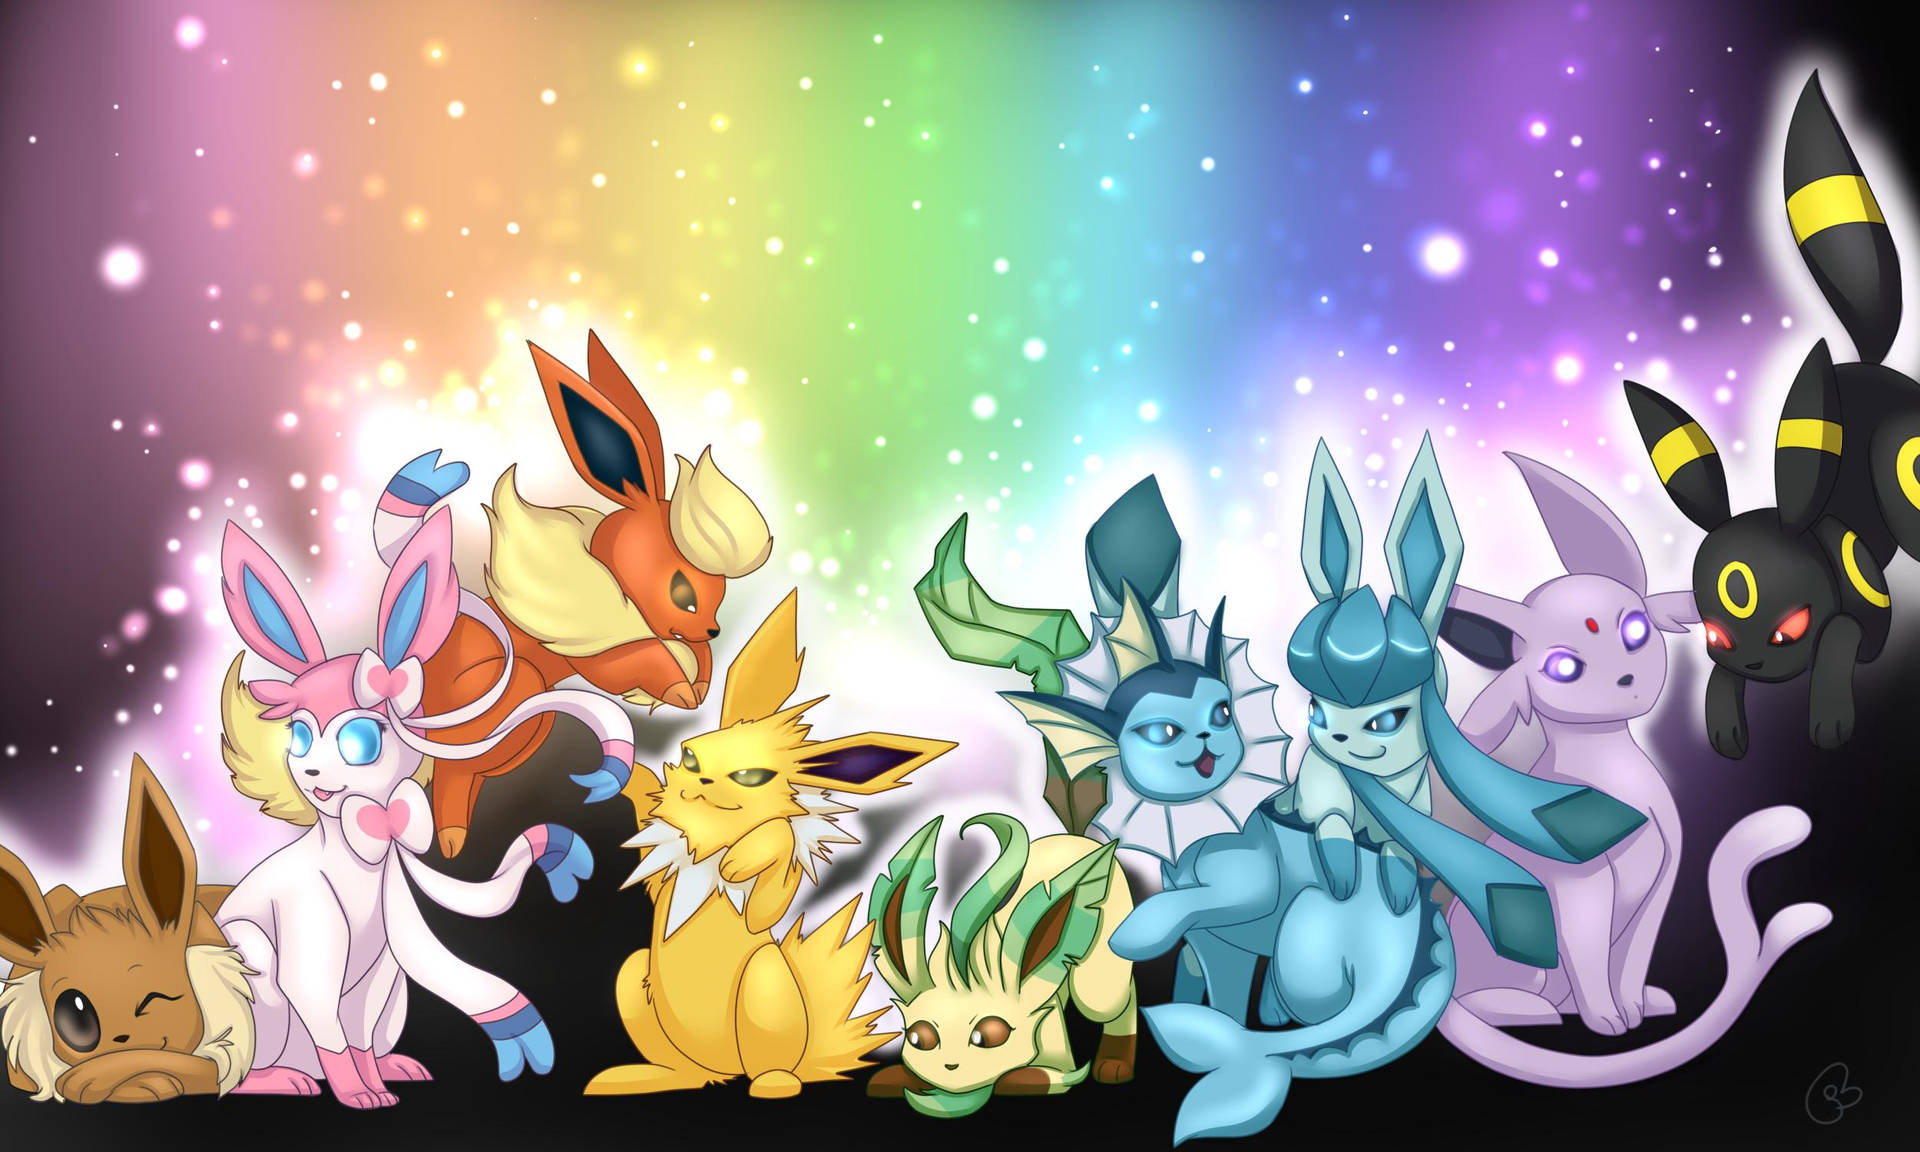 Glittery Eevee And Its Beautiful Final Form, Sylveon Background